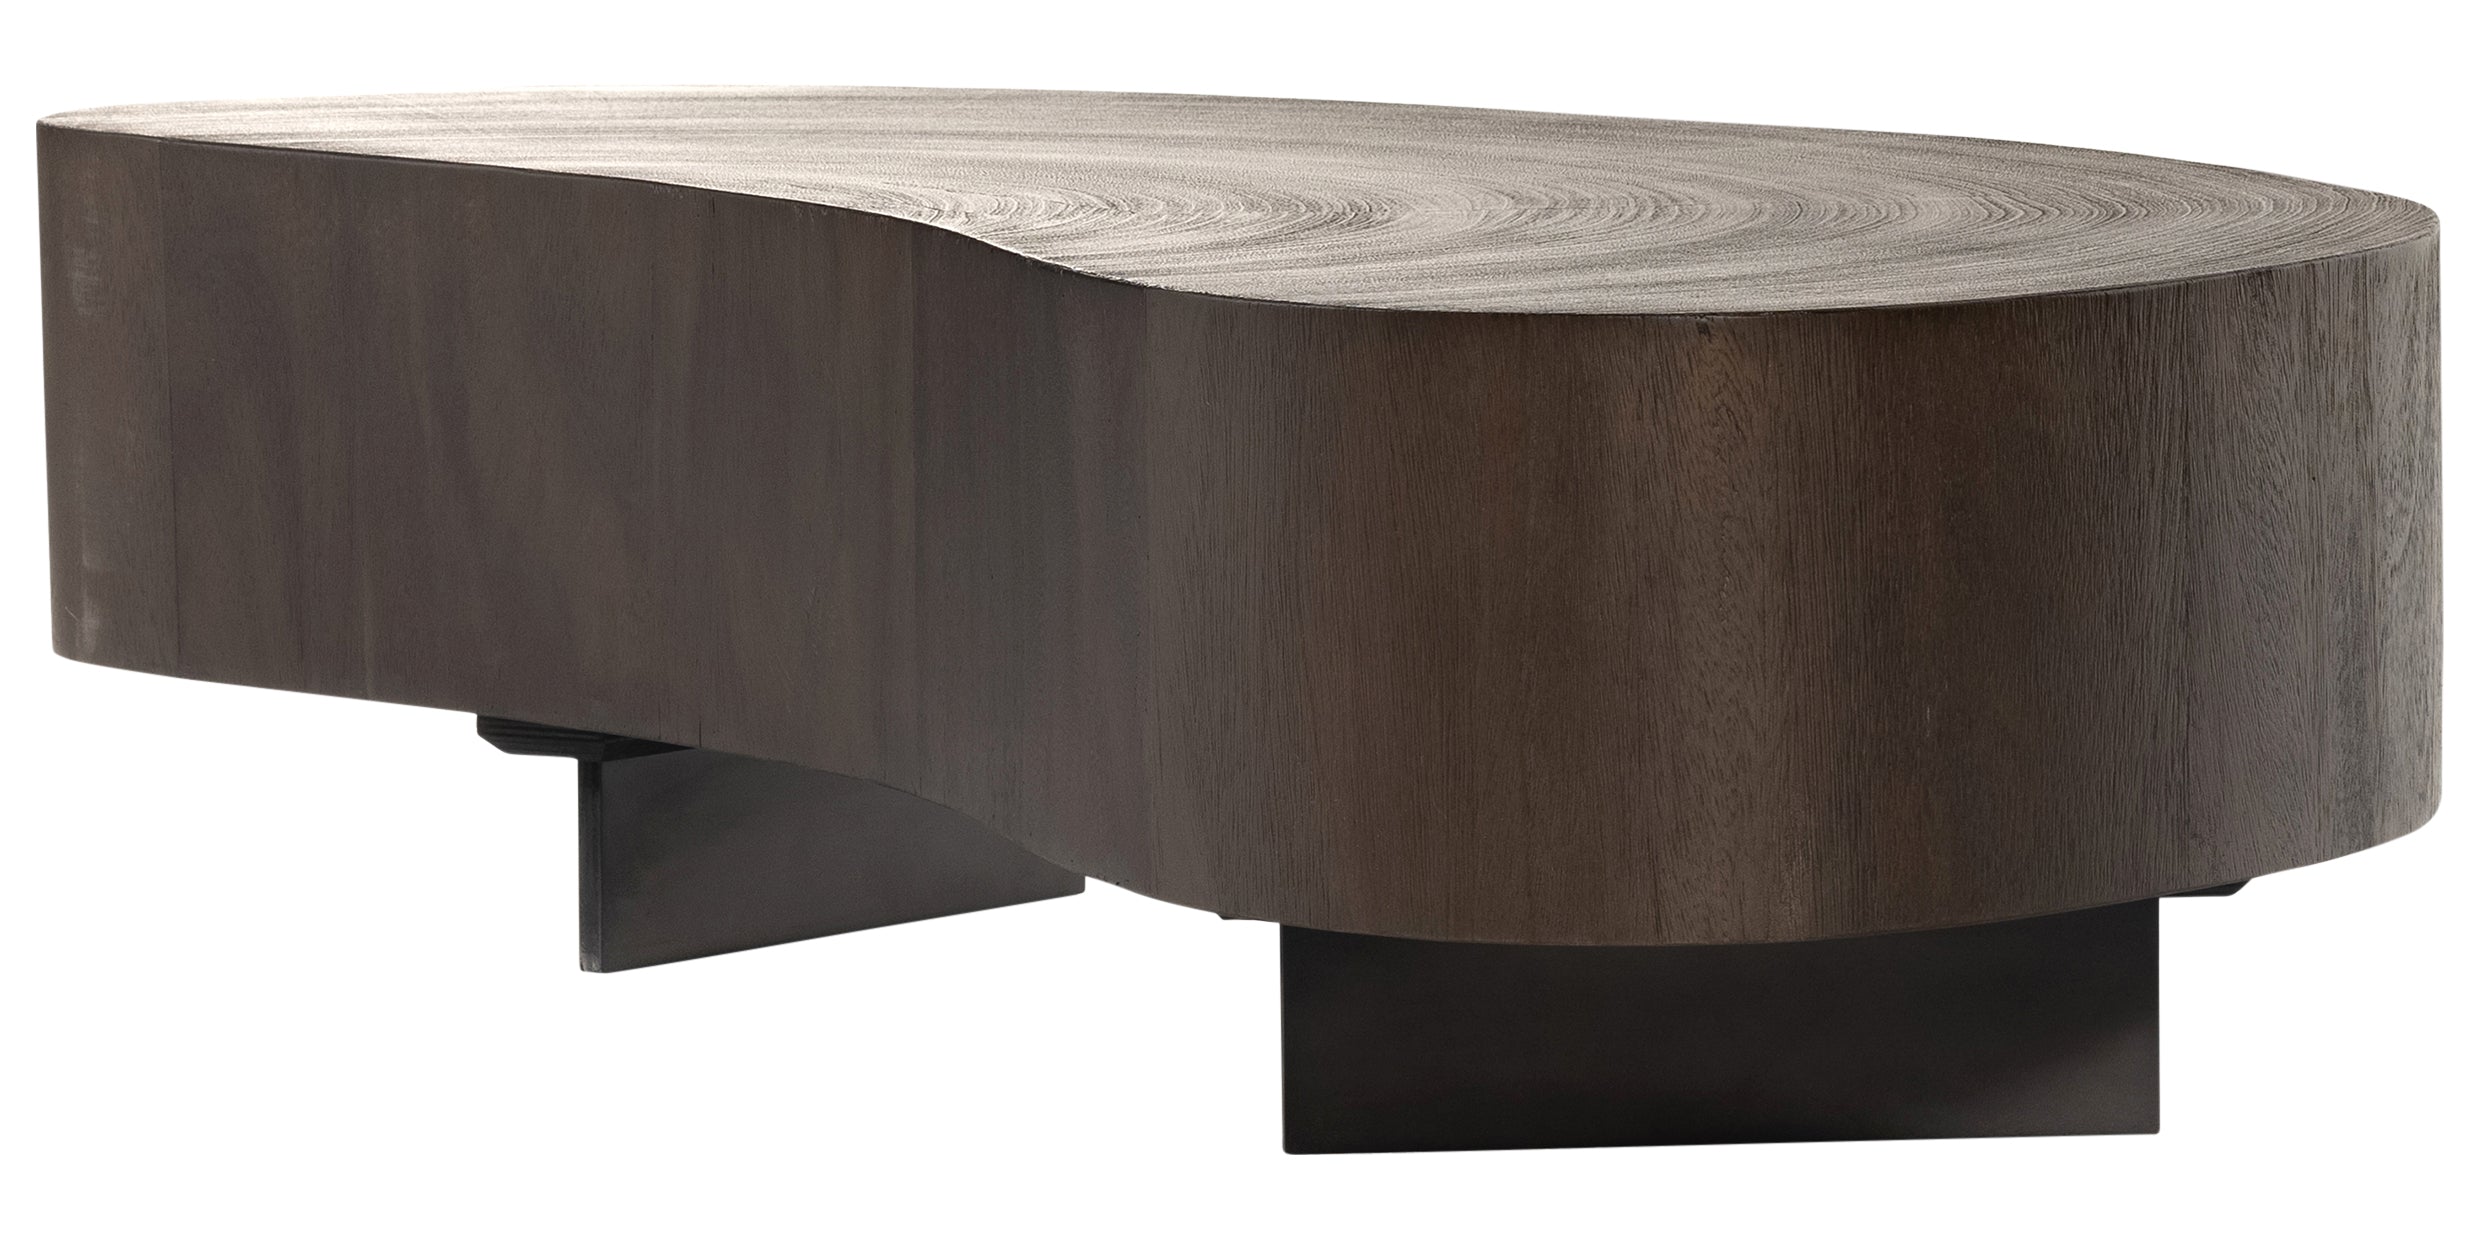 Smoked Guanacaste and Smoked Guanacaste Oyster with Gunmetal Iron (Short Piece) | Avett Coffee Table | Valley Ridge Furniture